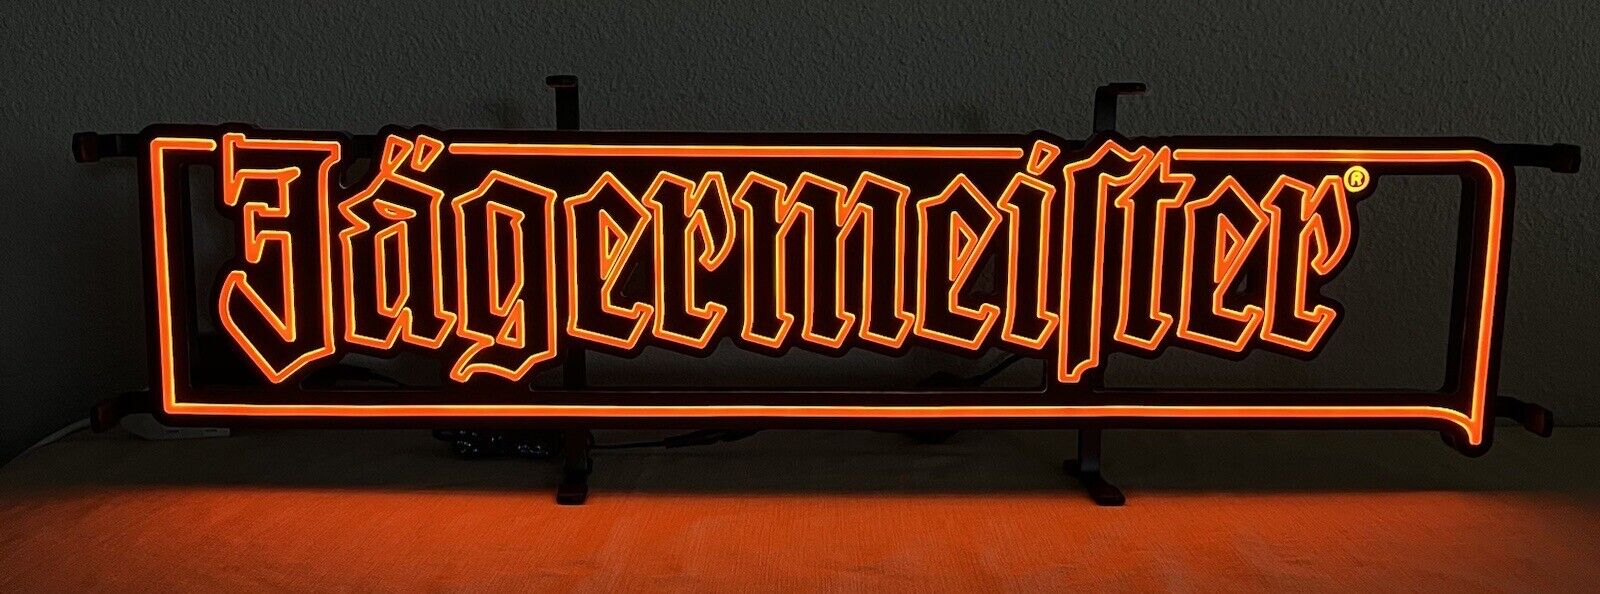 JAGERMEISTER LED FAUX NEON LIT LIGHTED WALL HANGING OR STANDING BAR PUB SIGN NEW